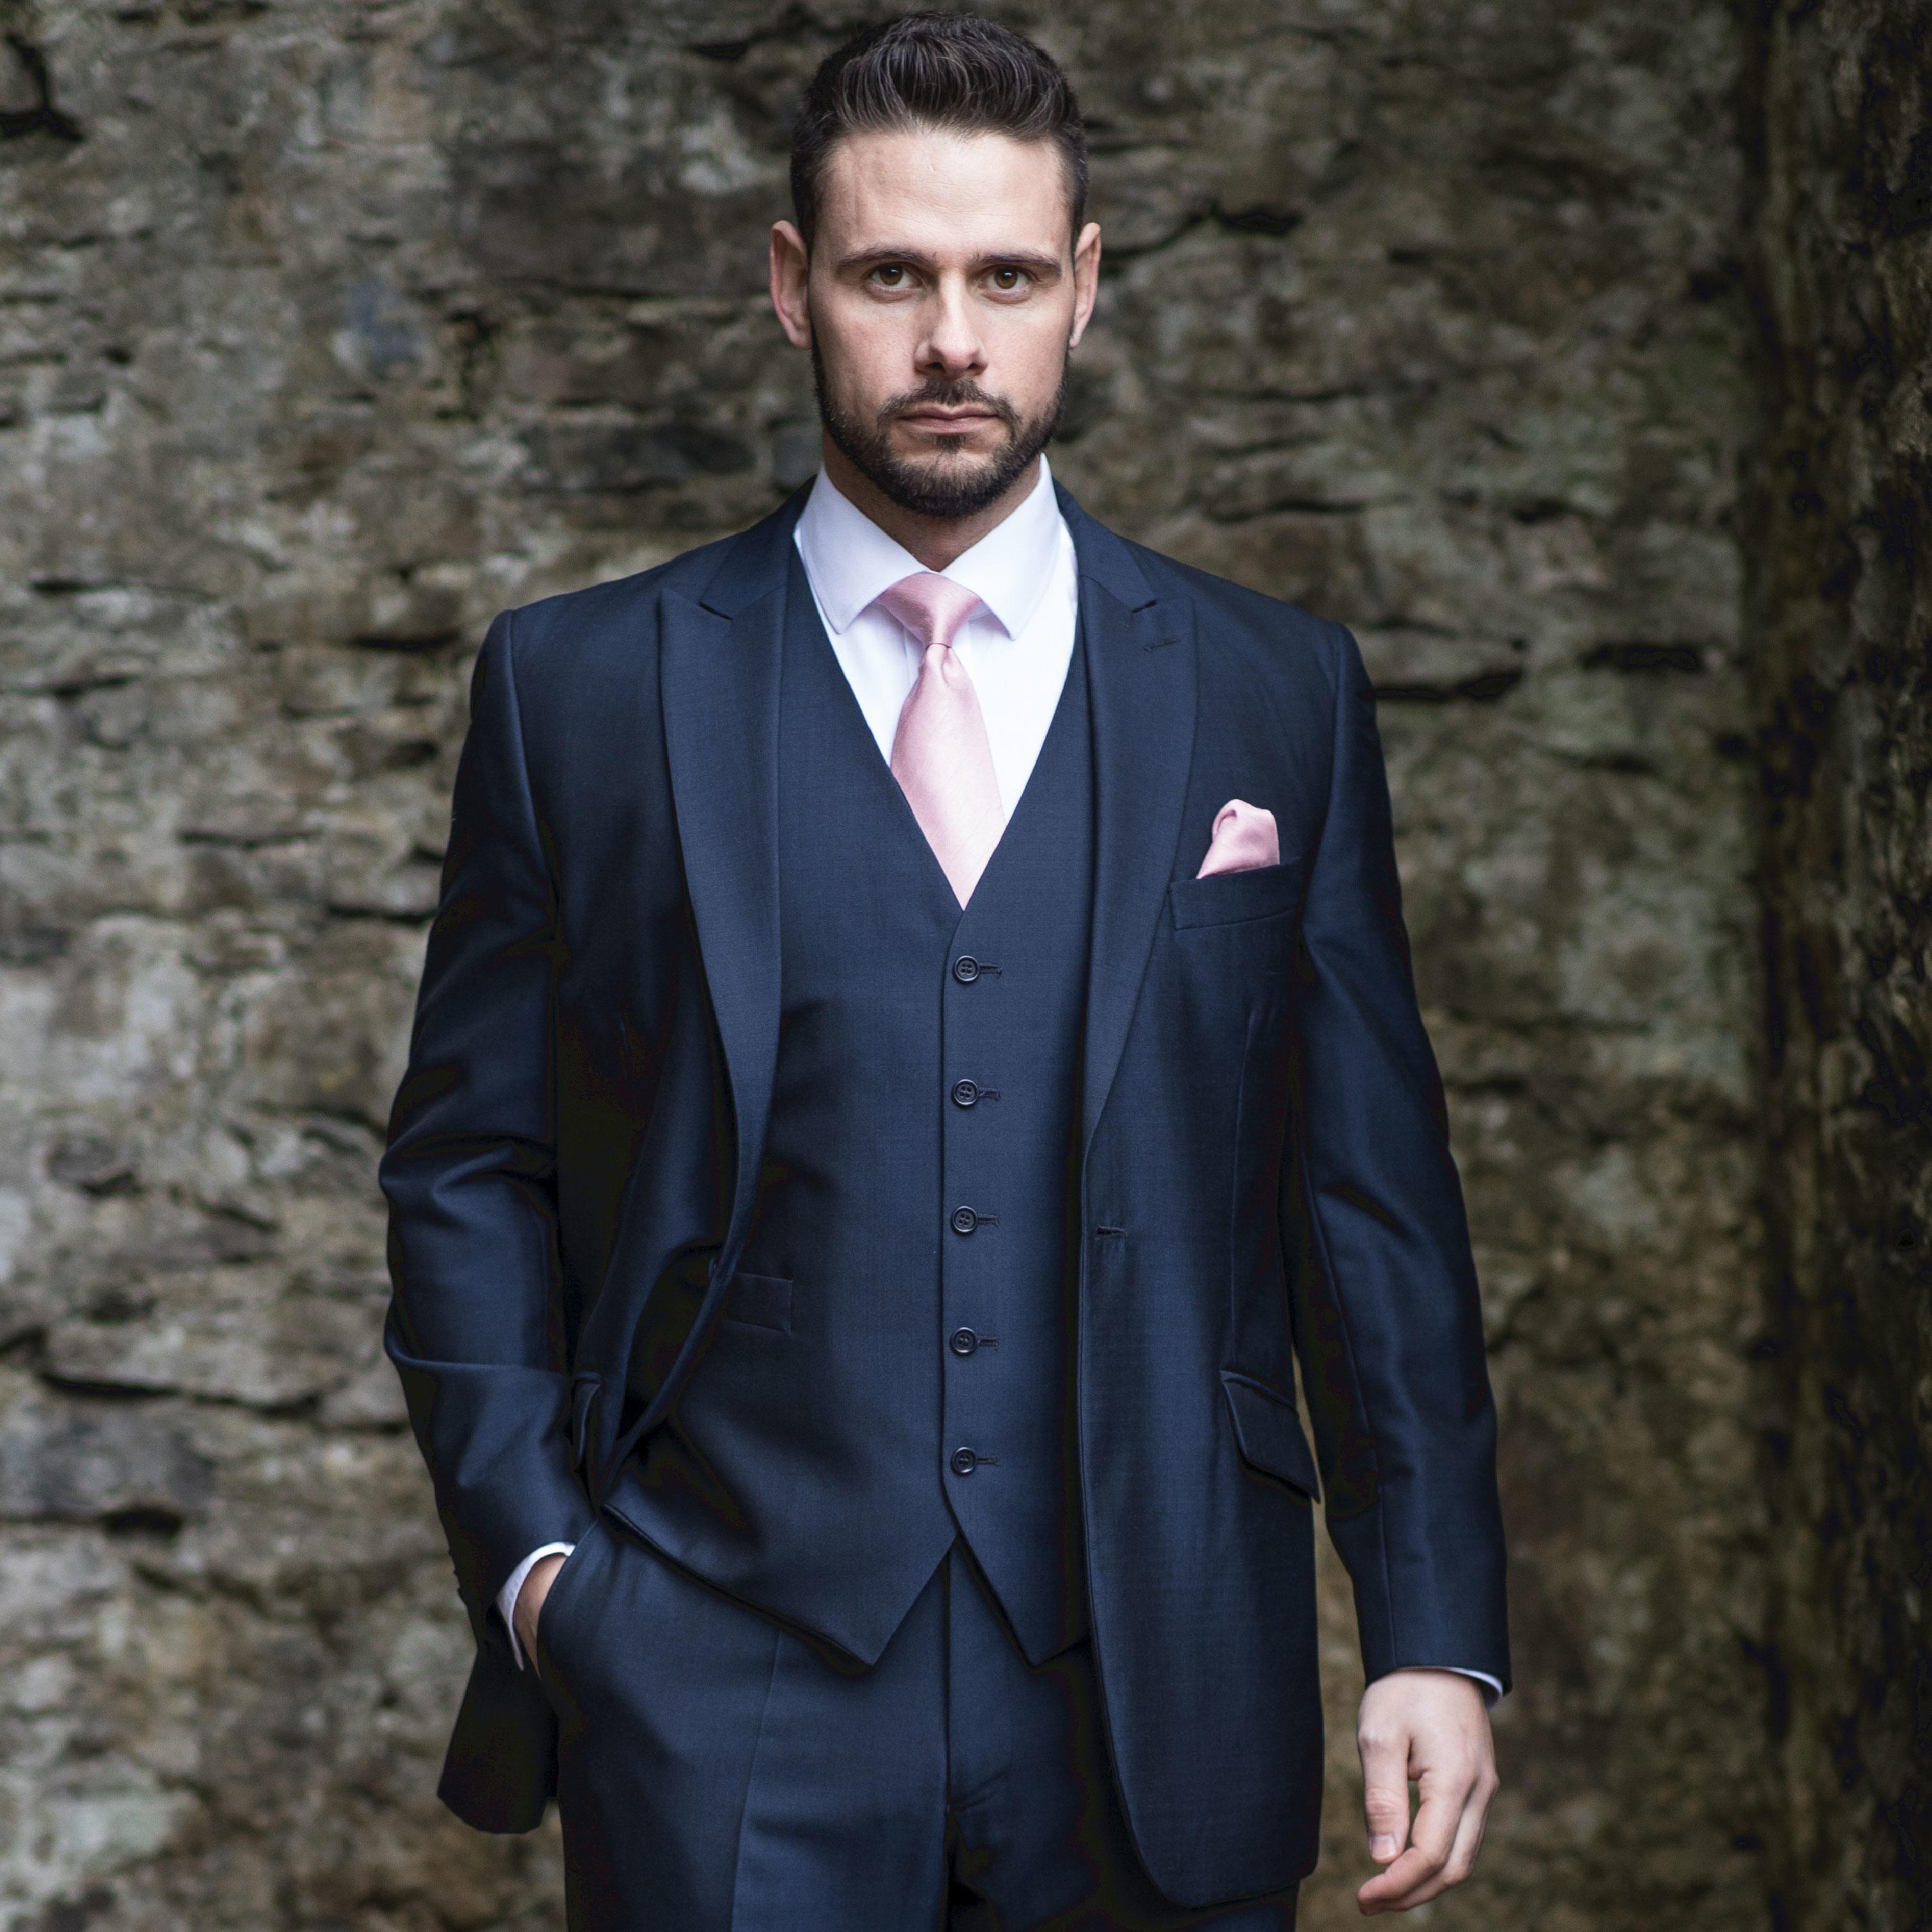 Men & Boys Lightweight Wedding Suit | Available to Hire or Buy | Formal ...